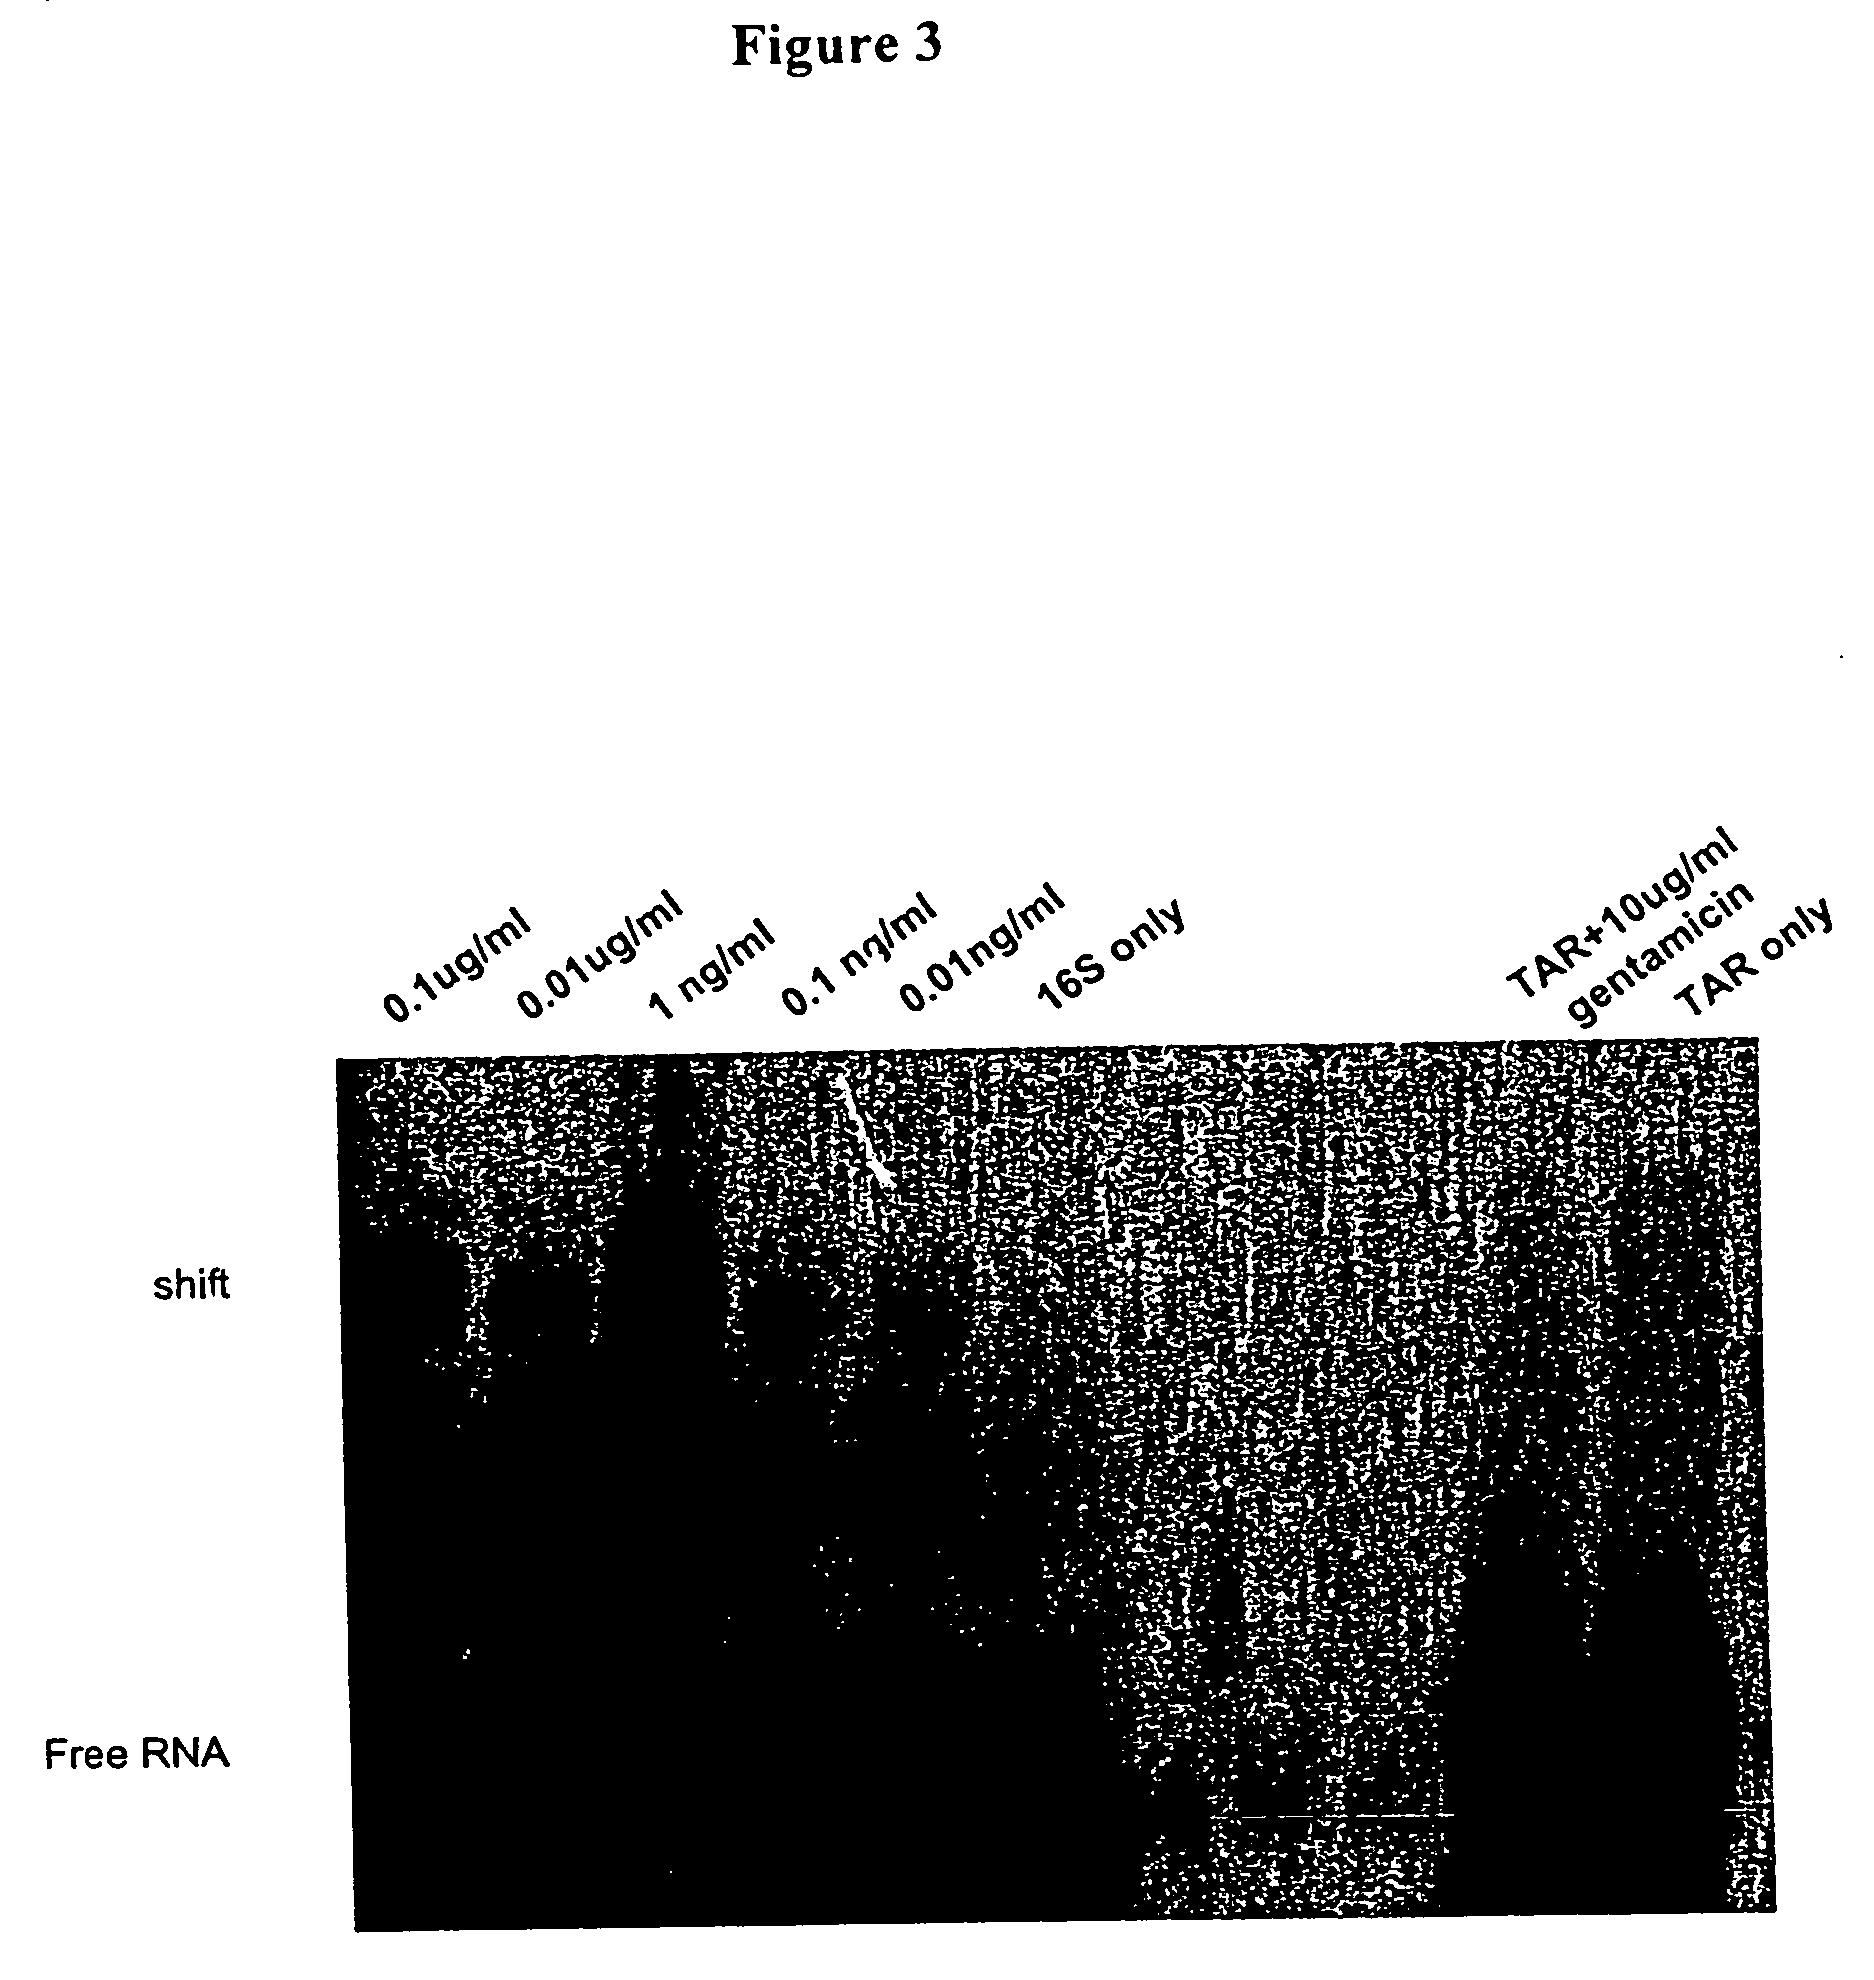 Methods for identifying small molecules that bind specific RNA structural motifs